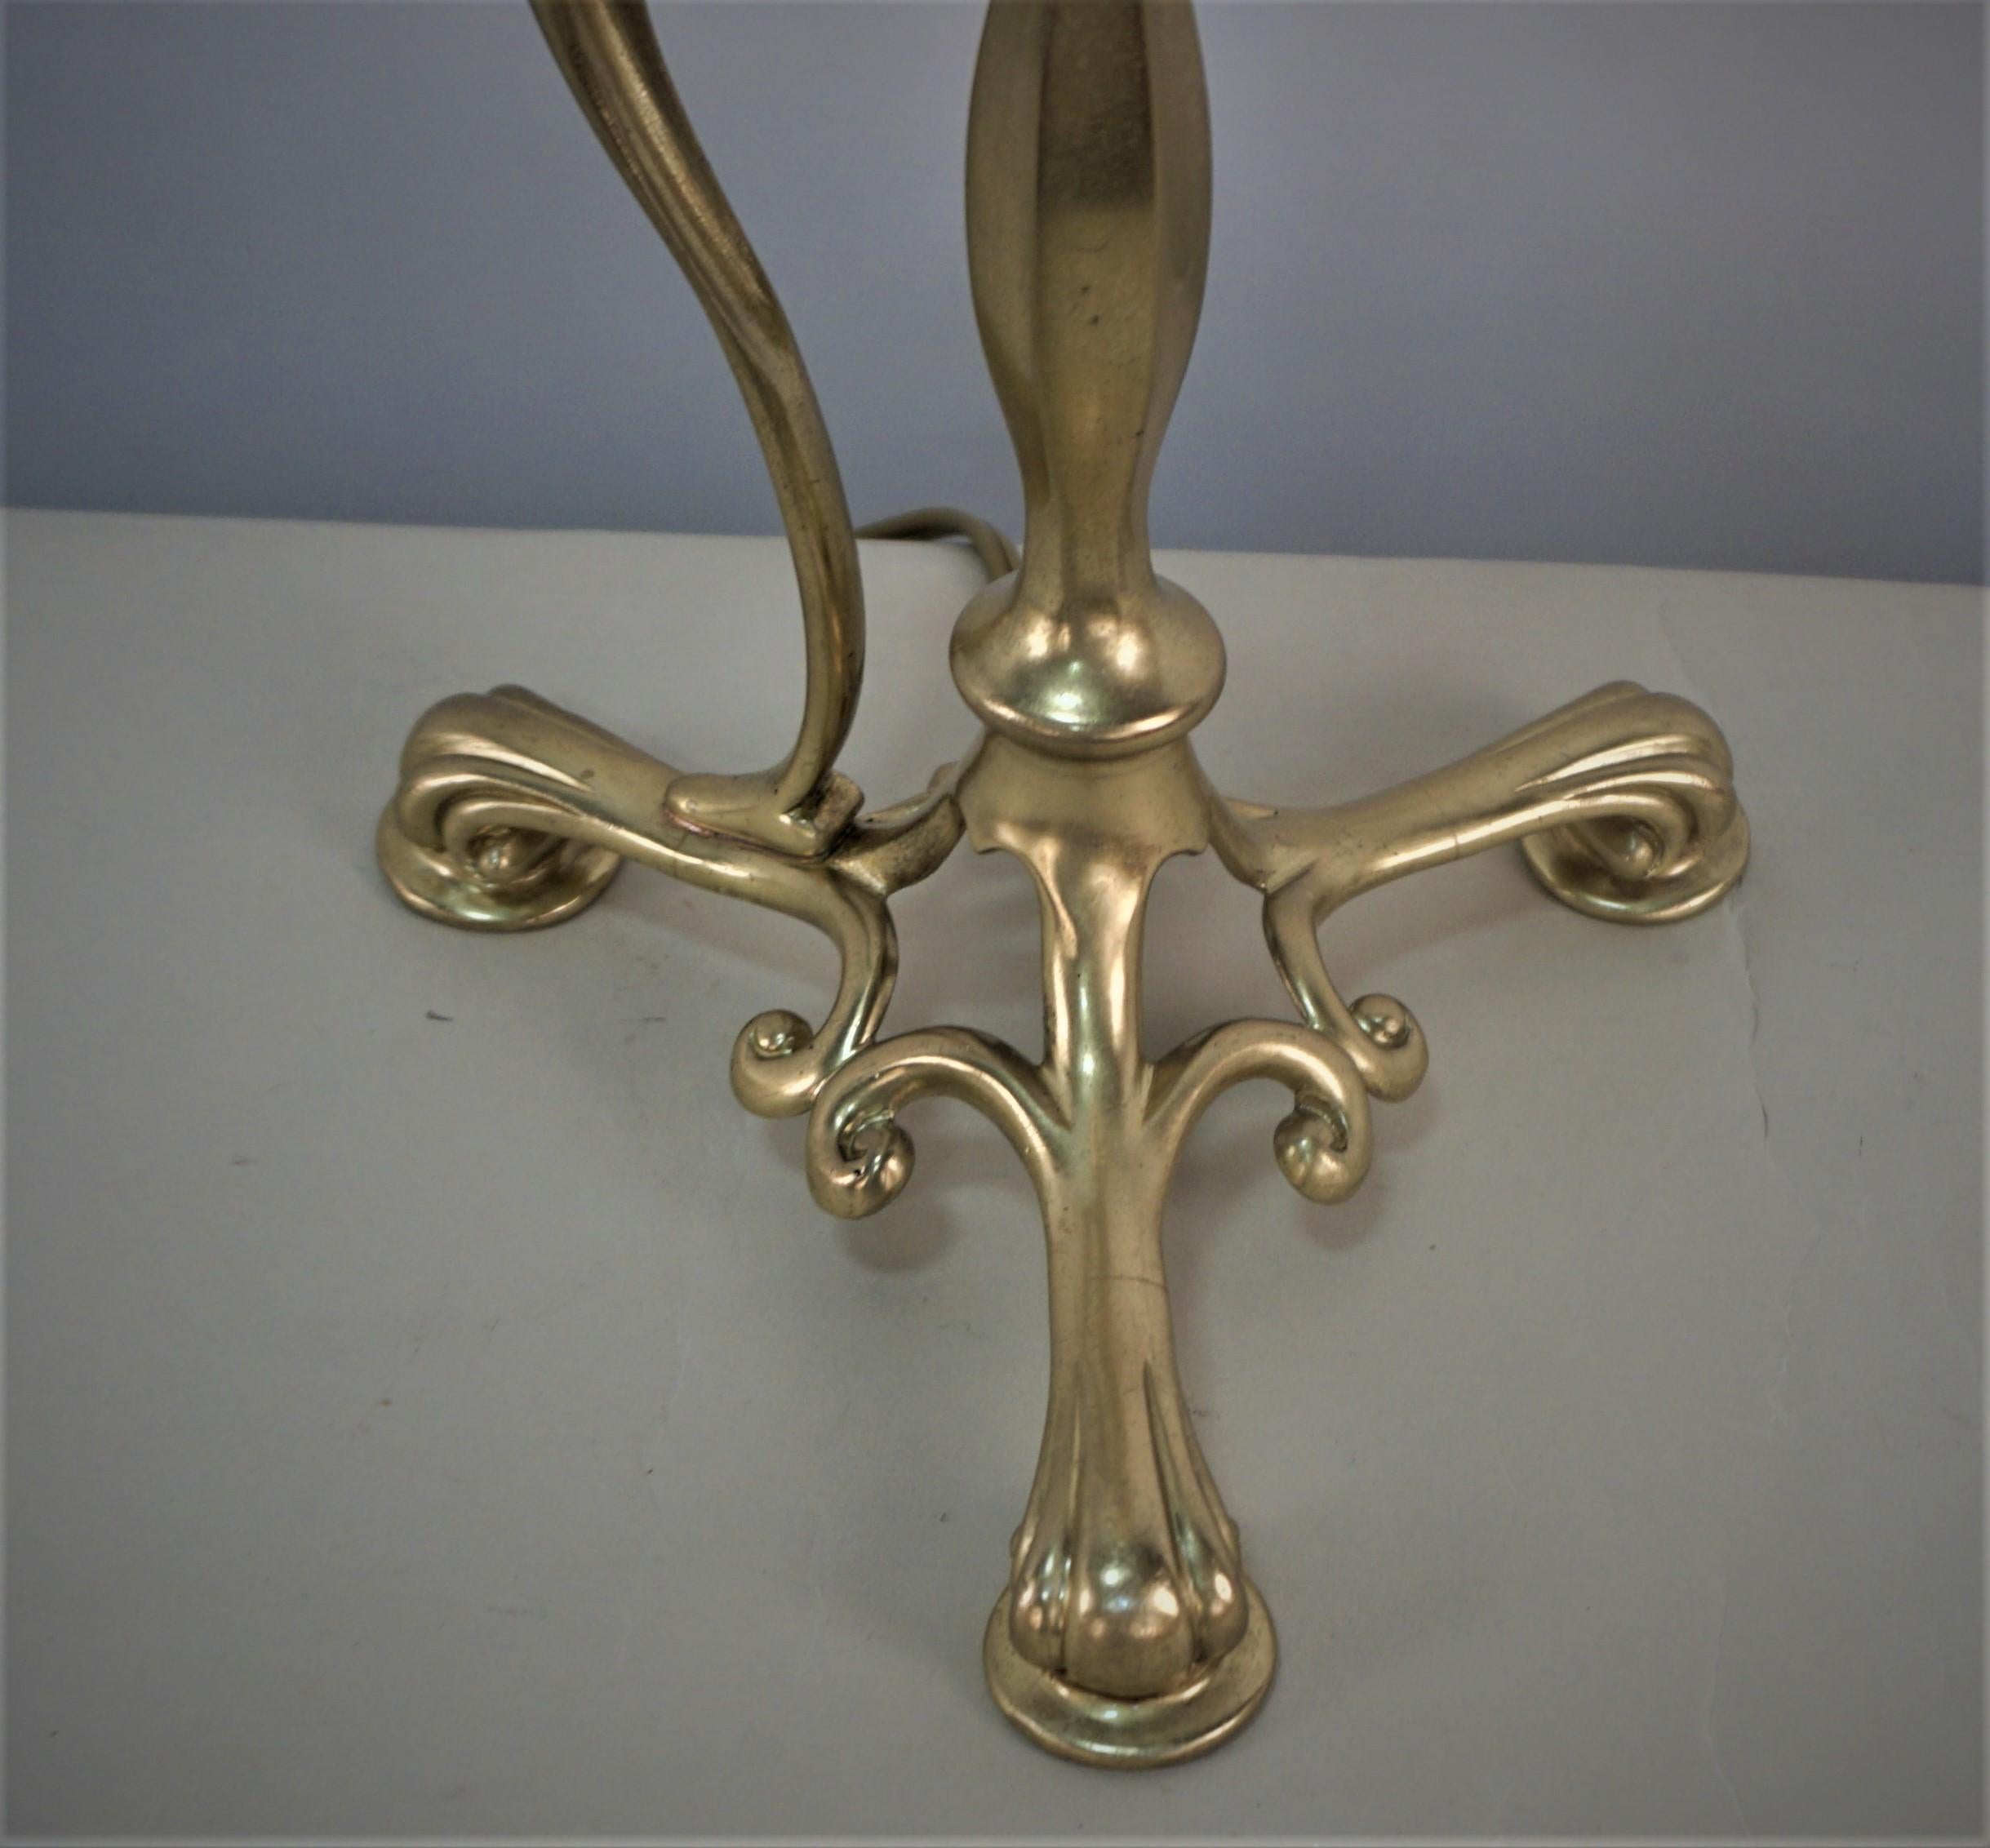 Beautiful bronze-brass Arts & Crafts table lamp with Vaseline glass shade.